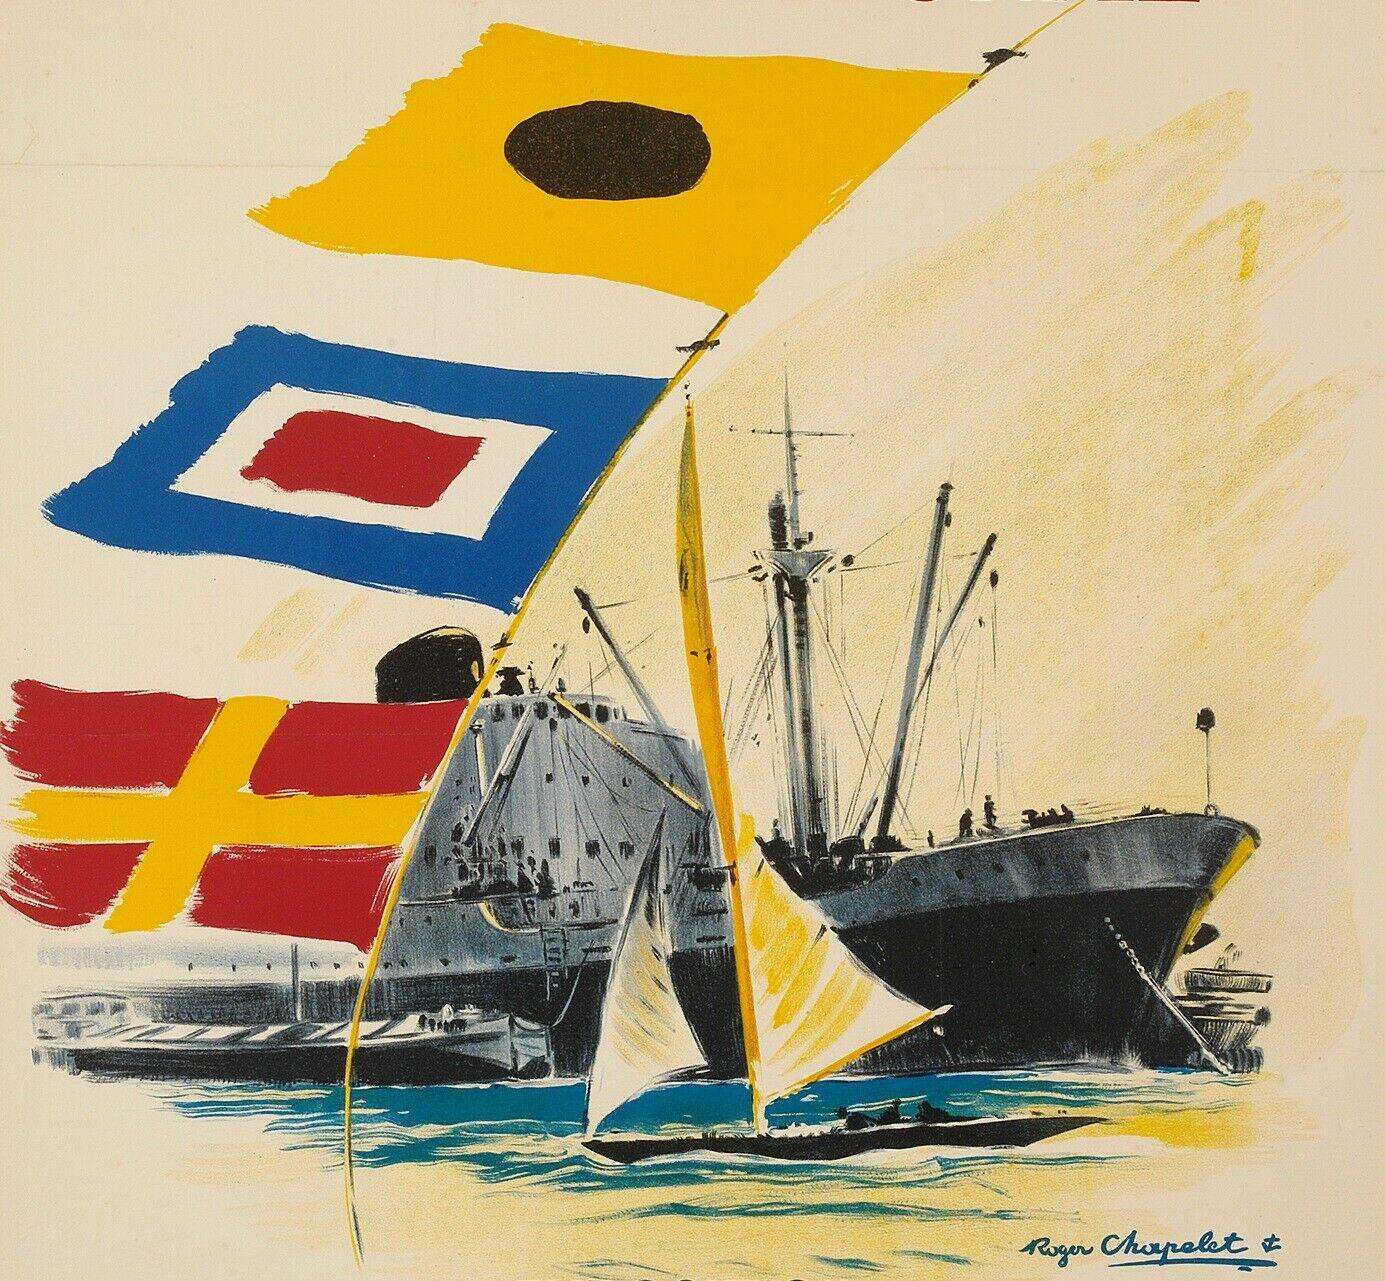 Original Vintage boating poster for the Paris boat show dating from 1950 by Roger Chapelet.

Roger Chapelet - September 25th 1931 - June 30th 1995) was a French marine painter and poster artist.

Roger Chapelet’s career as a maritime painter